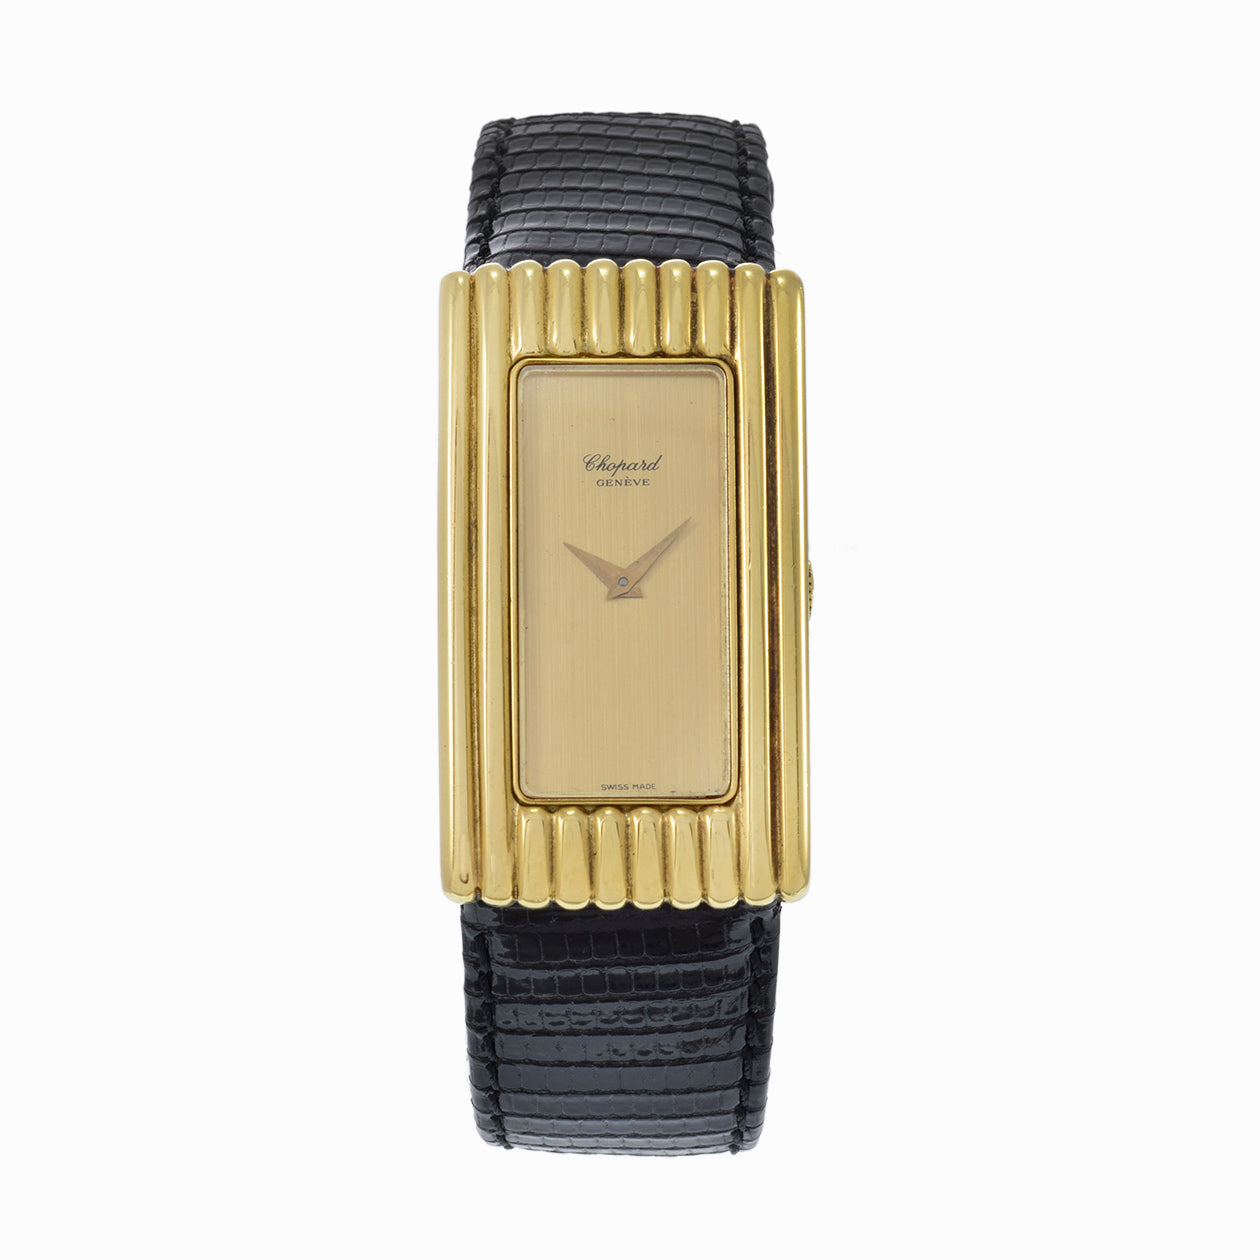 Vintage 1970's Chopard 79904 / 5058 18KT Yellow Gold watch